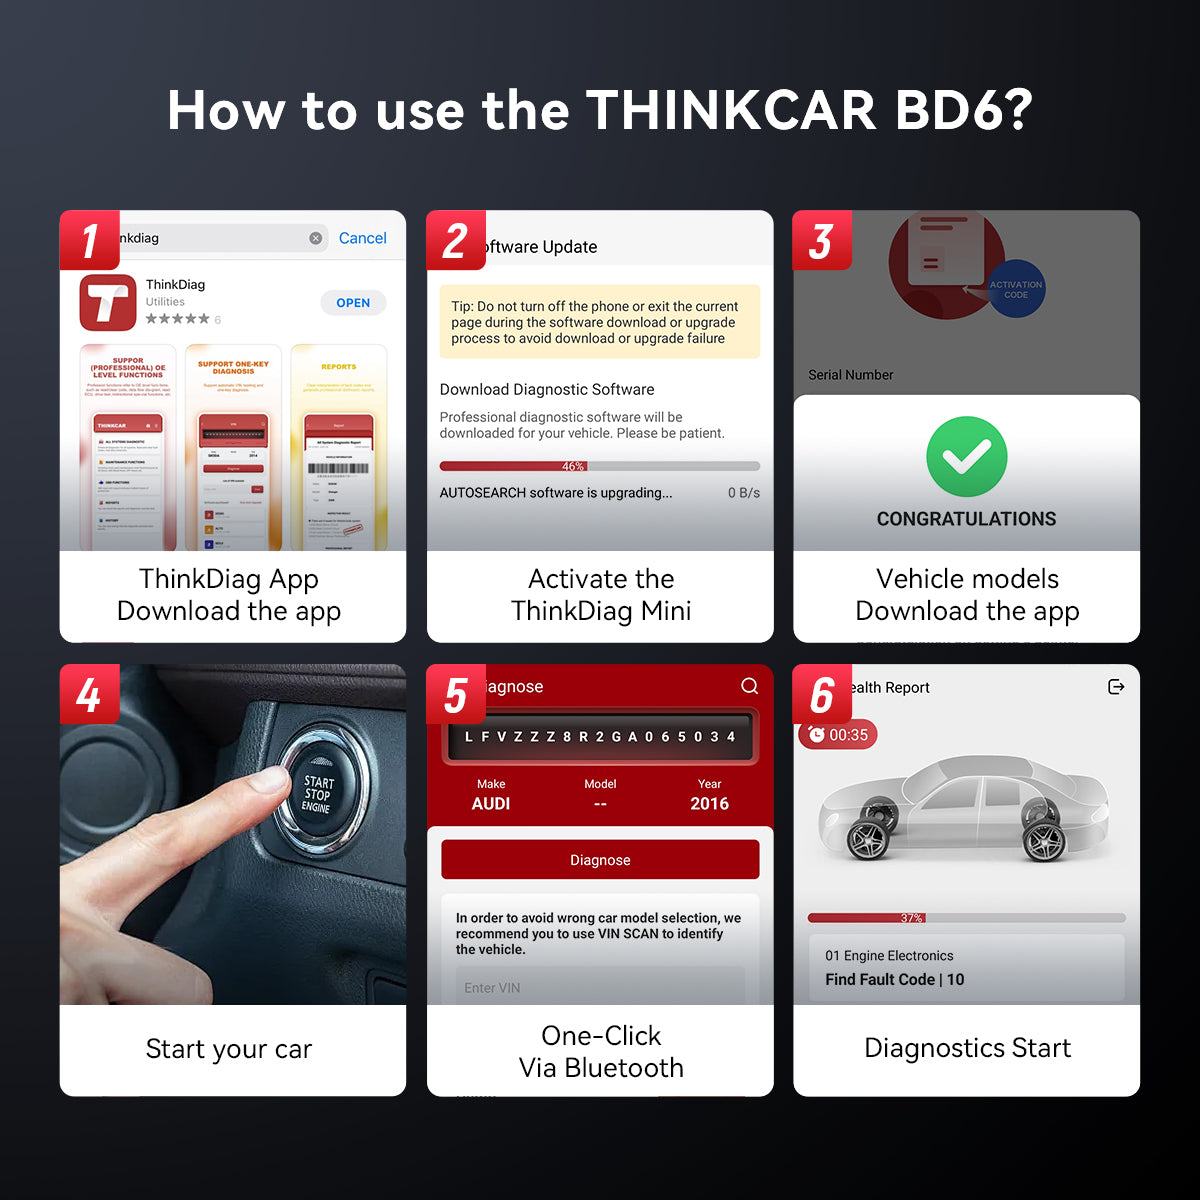 How to use the THINKCAR BD6?